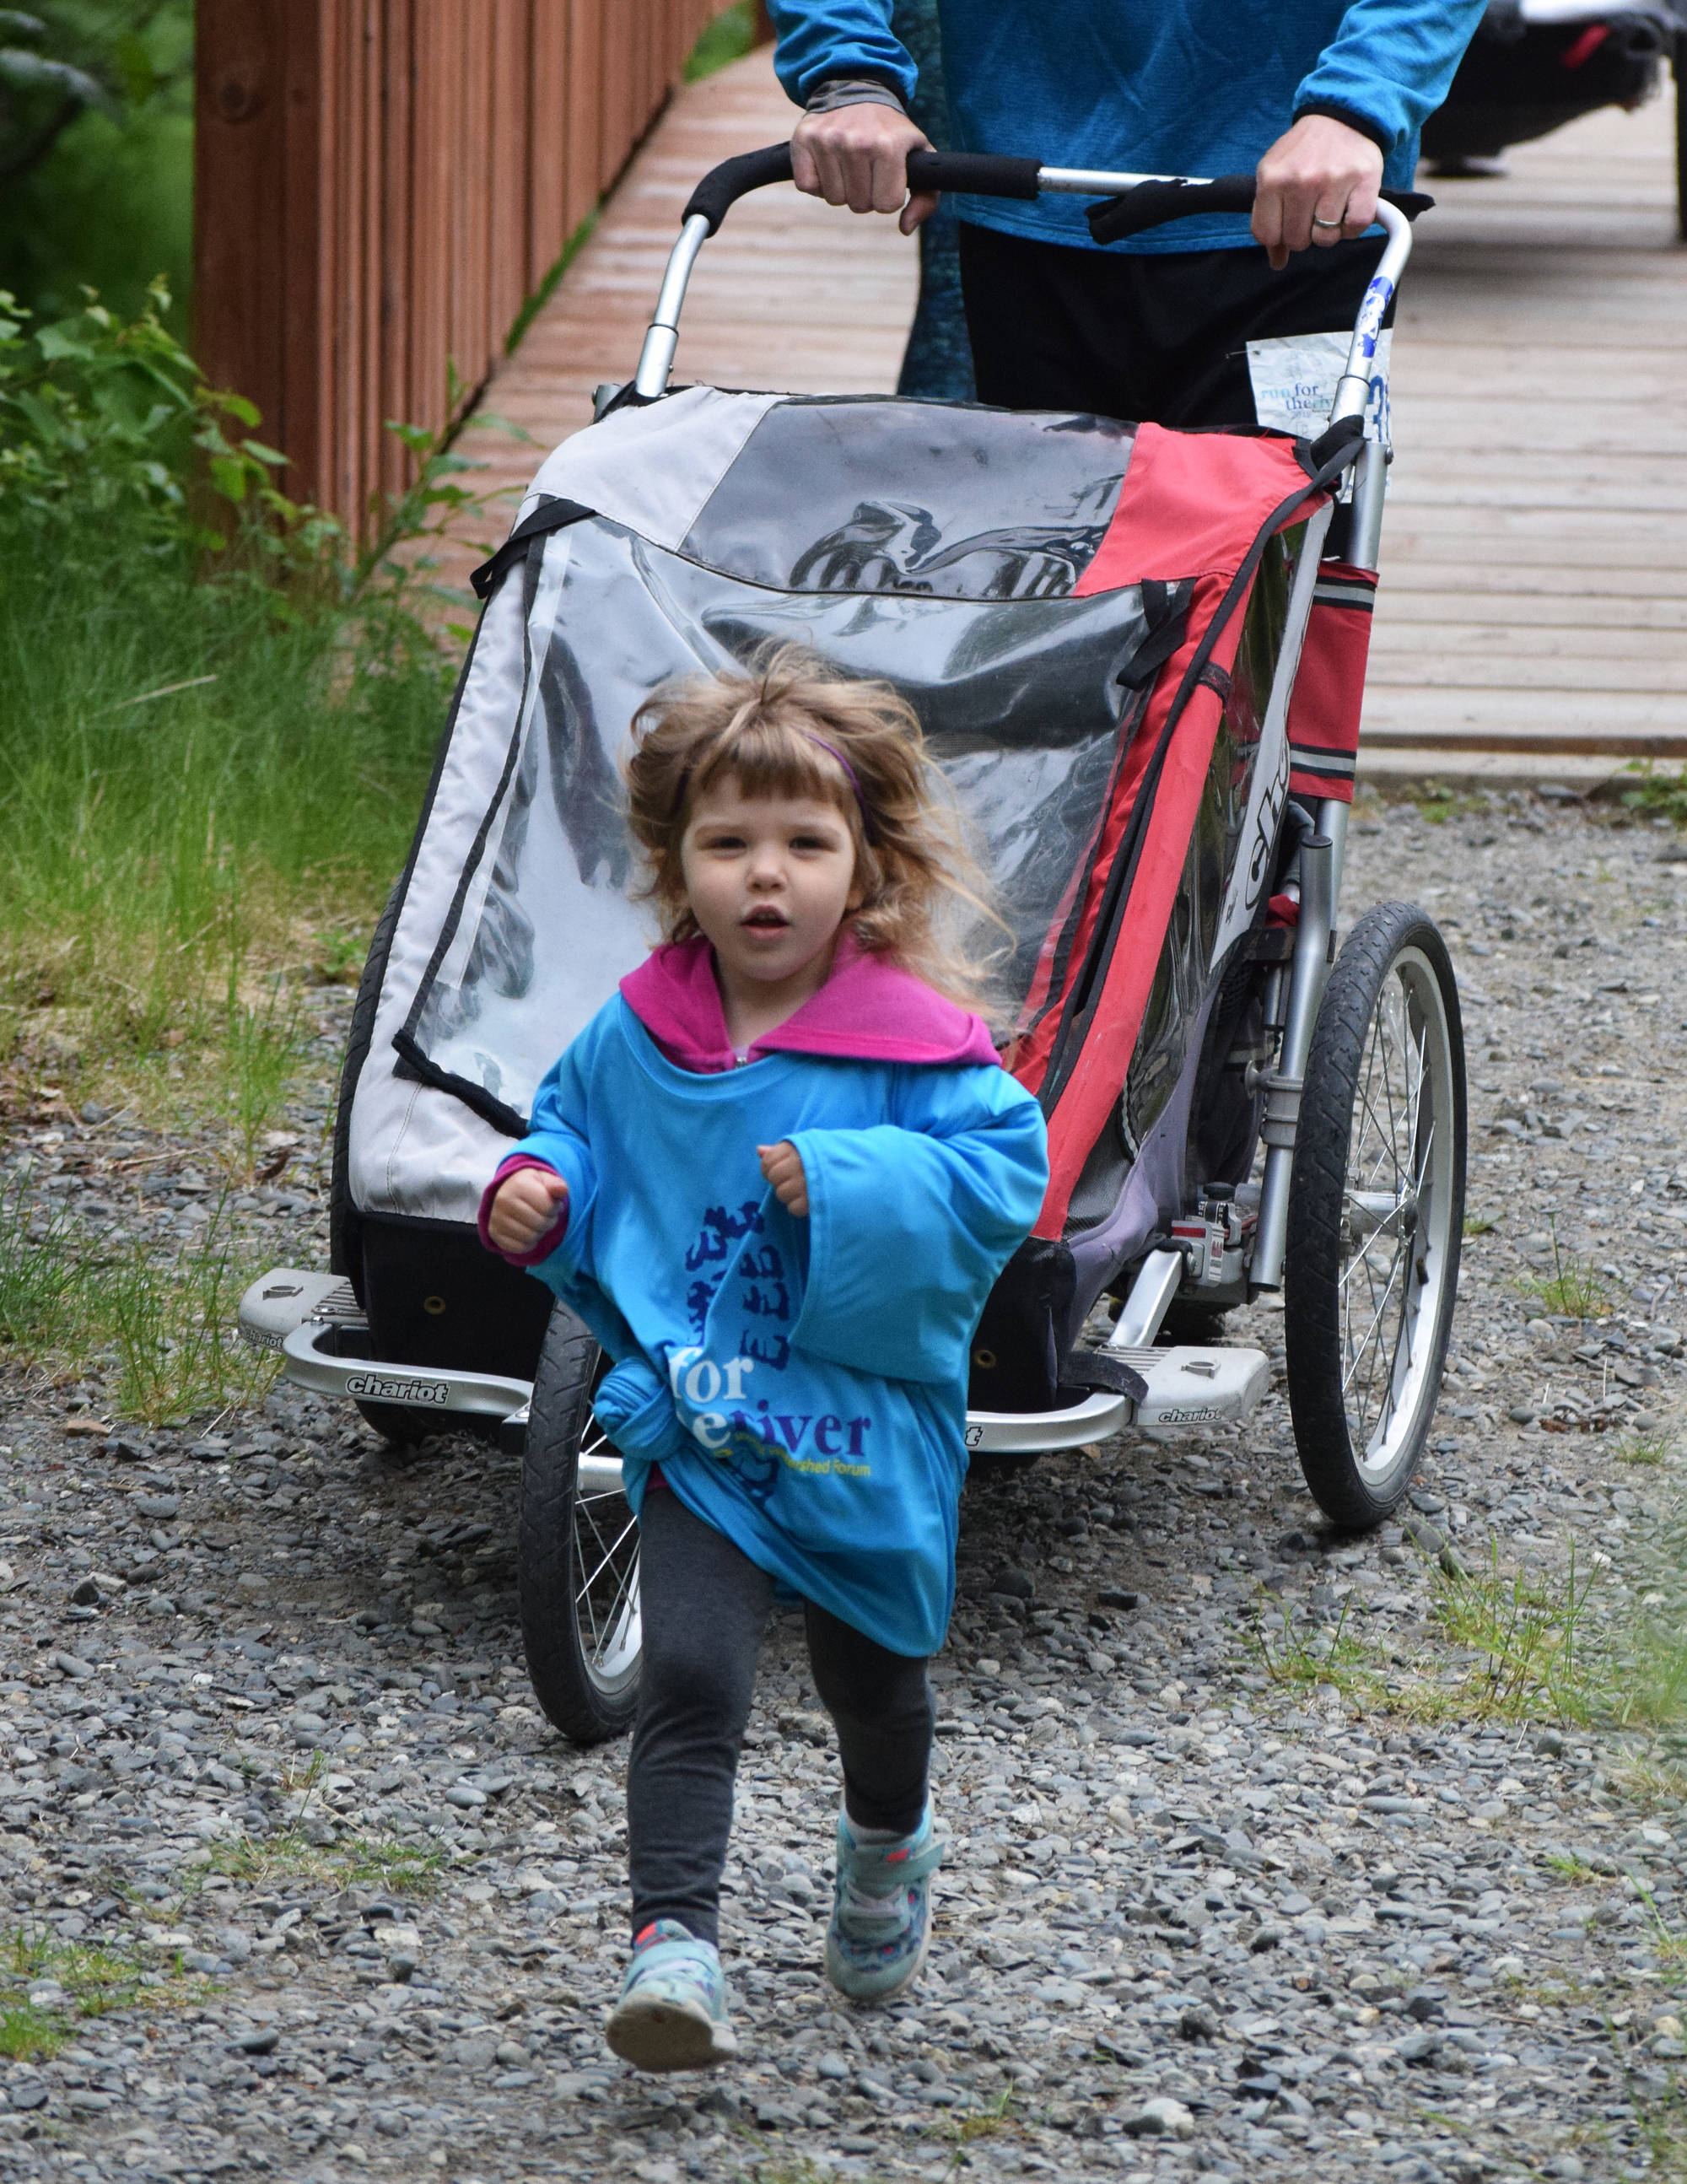 A young runner makes her way down the trail Saturday, June 8, 2019, at the Run for the River 5-kilometer/10-mile races in Soldotna, Alaska. (Photo by Joey Klecka/Peninsula Clarion)